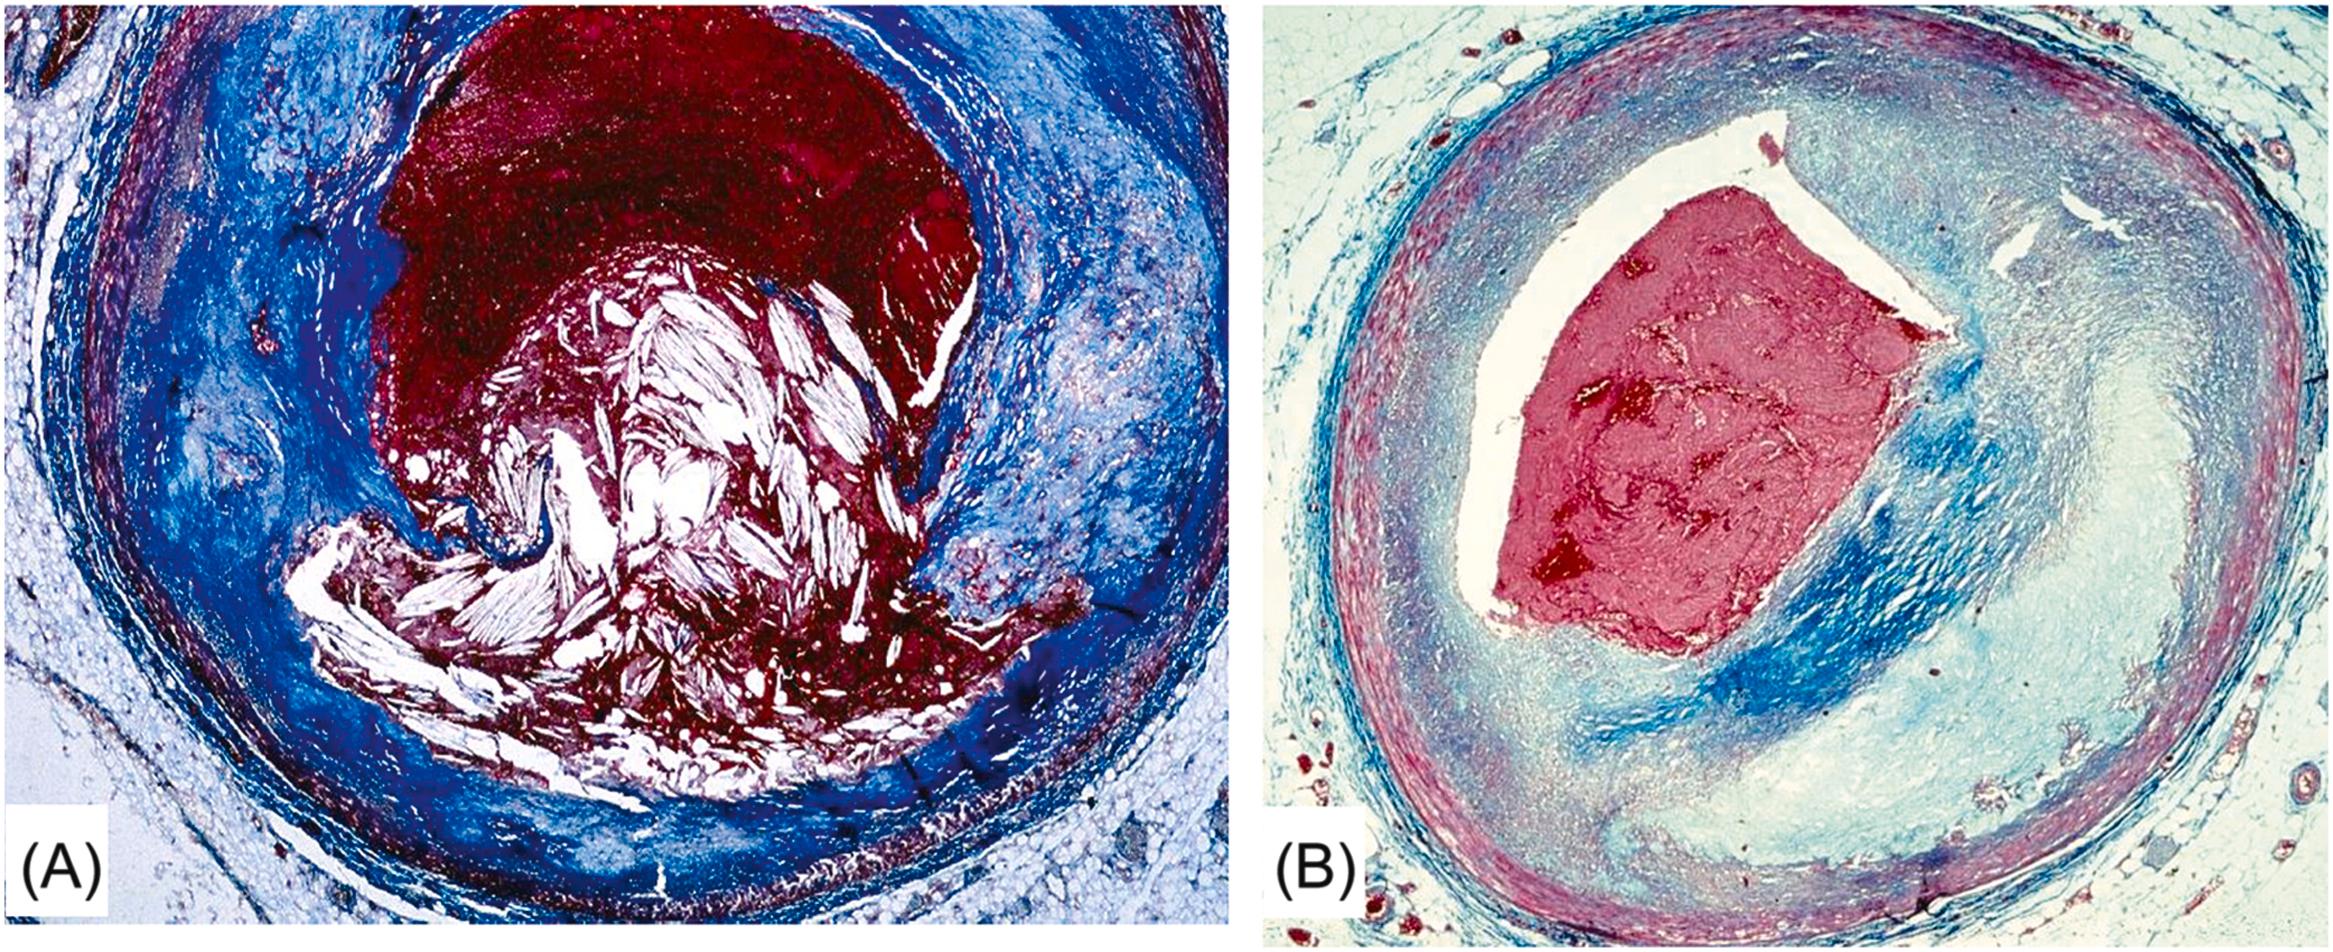 Figure 11.15, Arrhythmic sudden cardiac death caused by occlusive thrombosis of the left anterior descending coronary artery. (A) The acute occlusive thrombosis is related to a ruptured atherosclerotic plaque with a thin fibrous cap. (B) Acute occlusive thrombosis upon an atherosclerotic plaque with a thick fibrous cap, caused by endothelial erosion (Heidenhain trichrome).